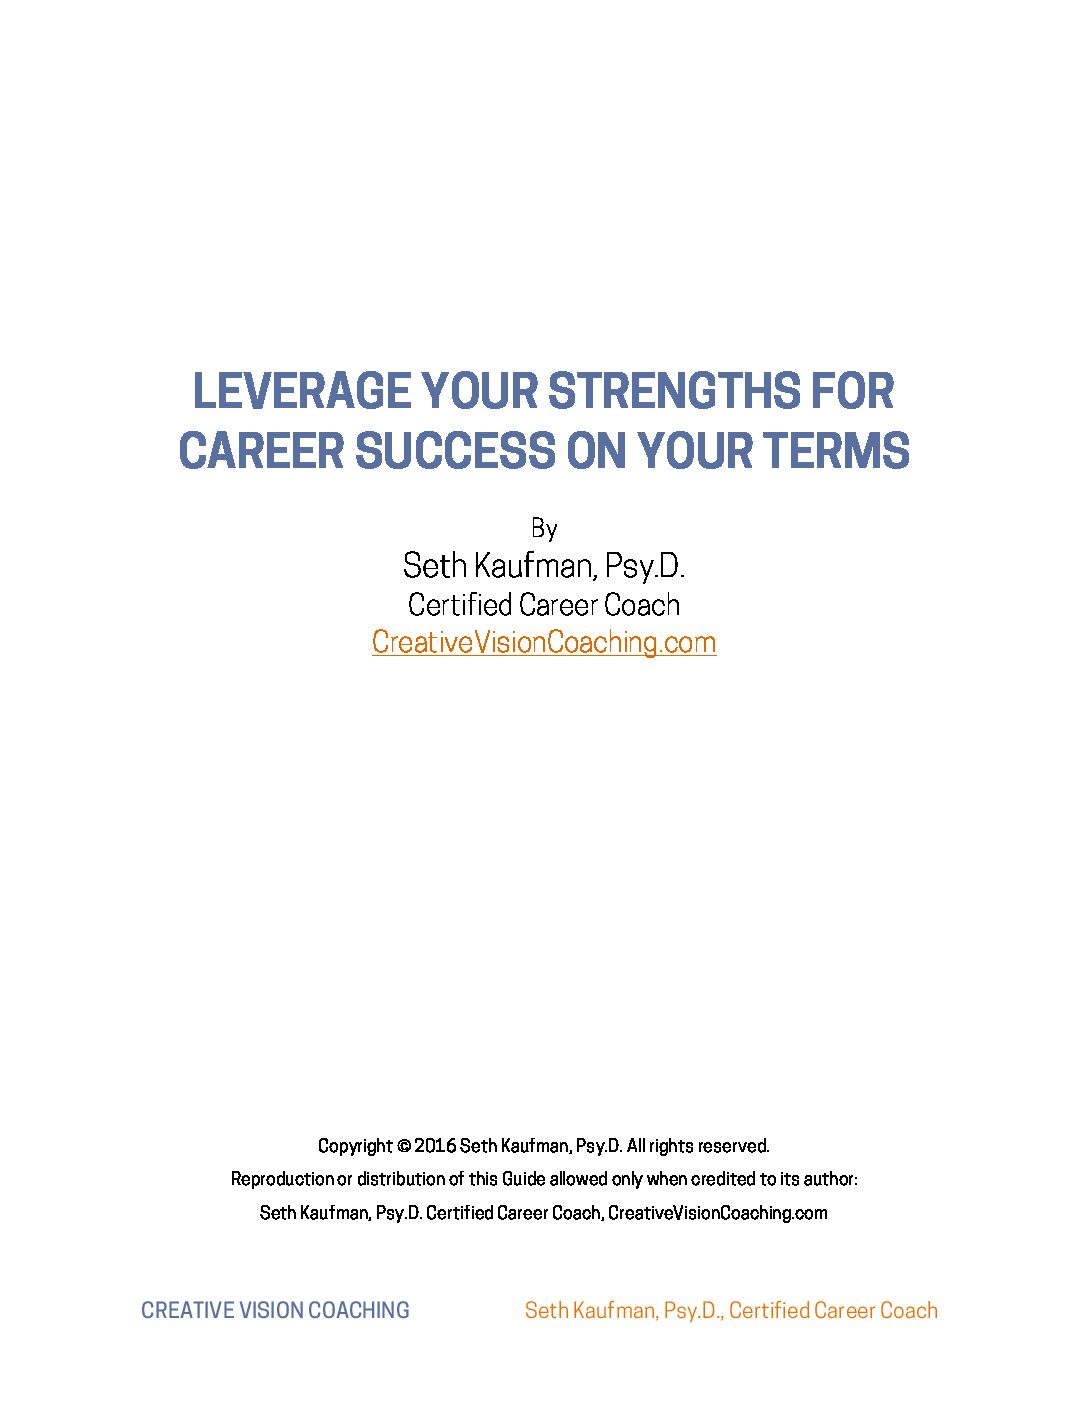 Click to Download Guide - Creative Vision Coaching